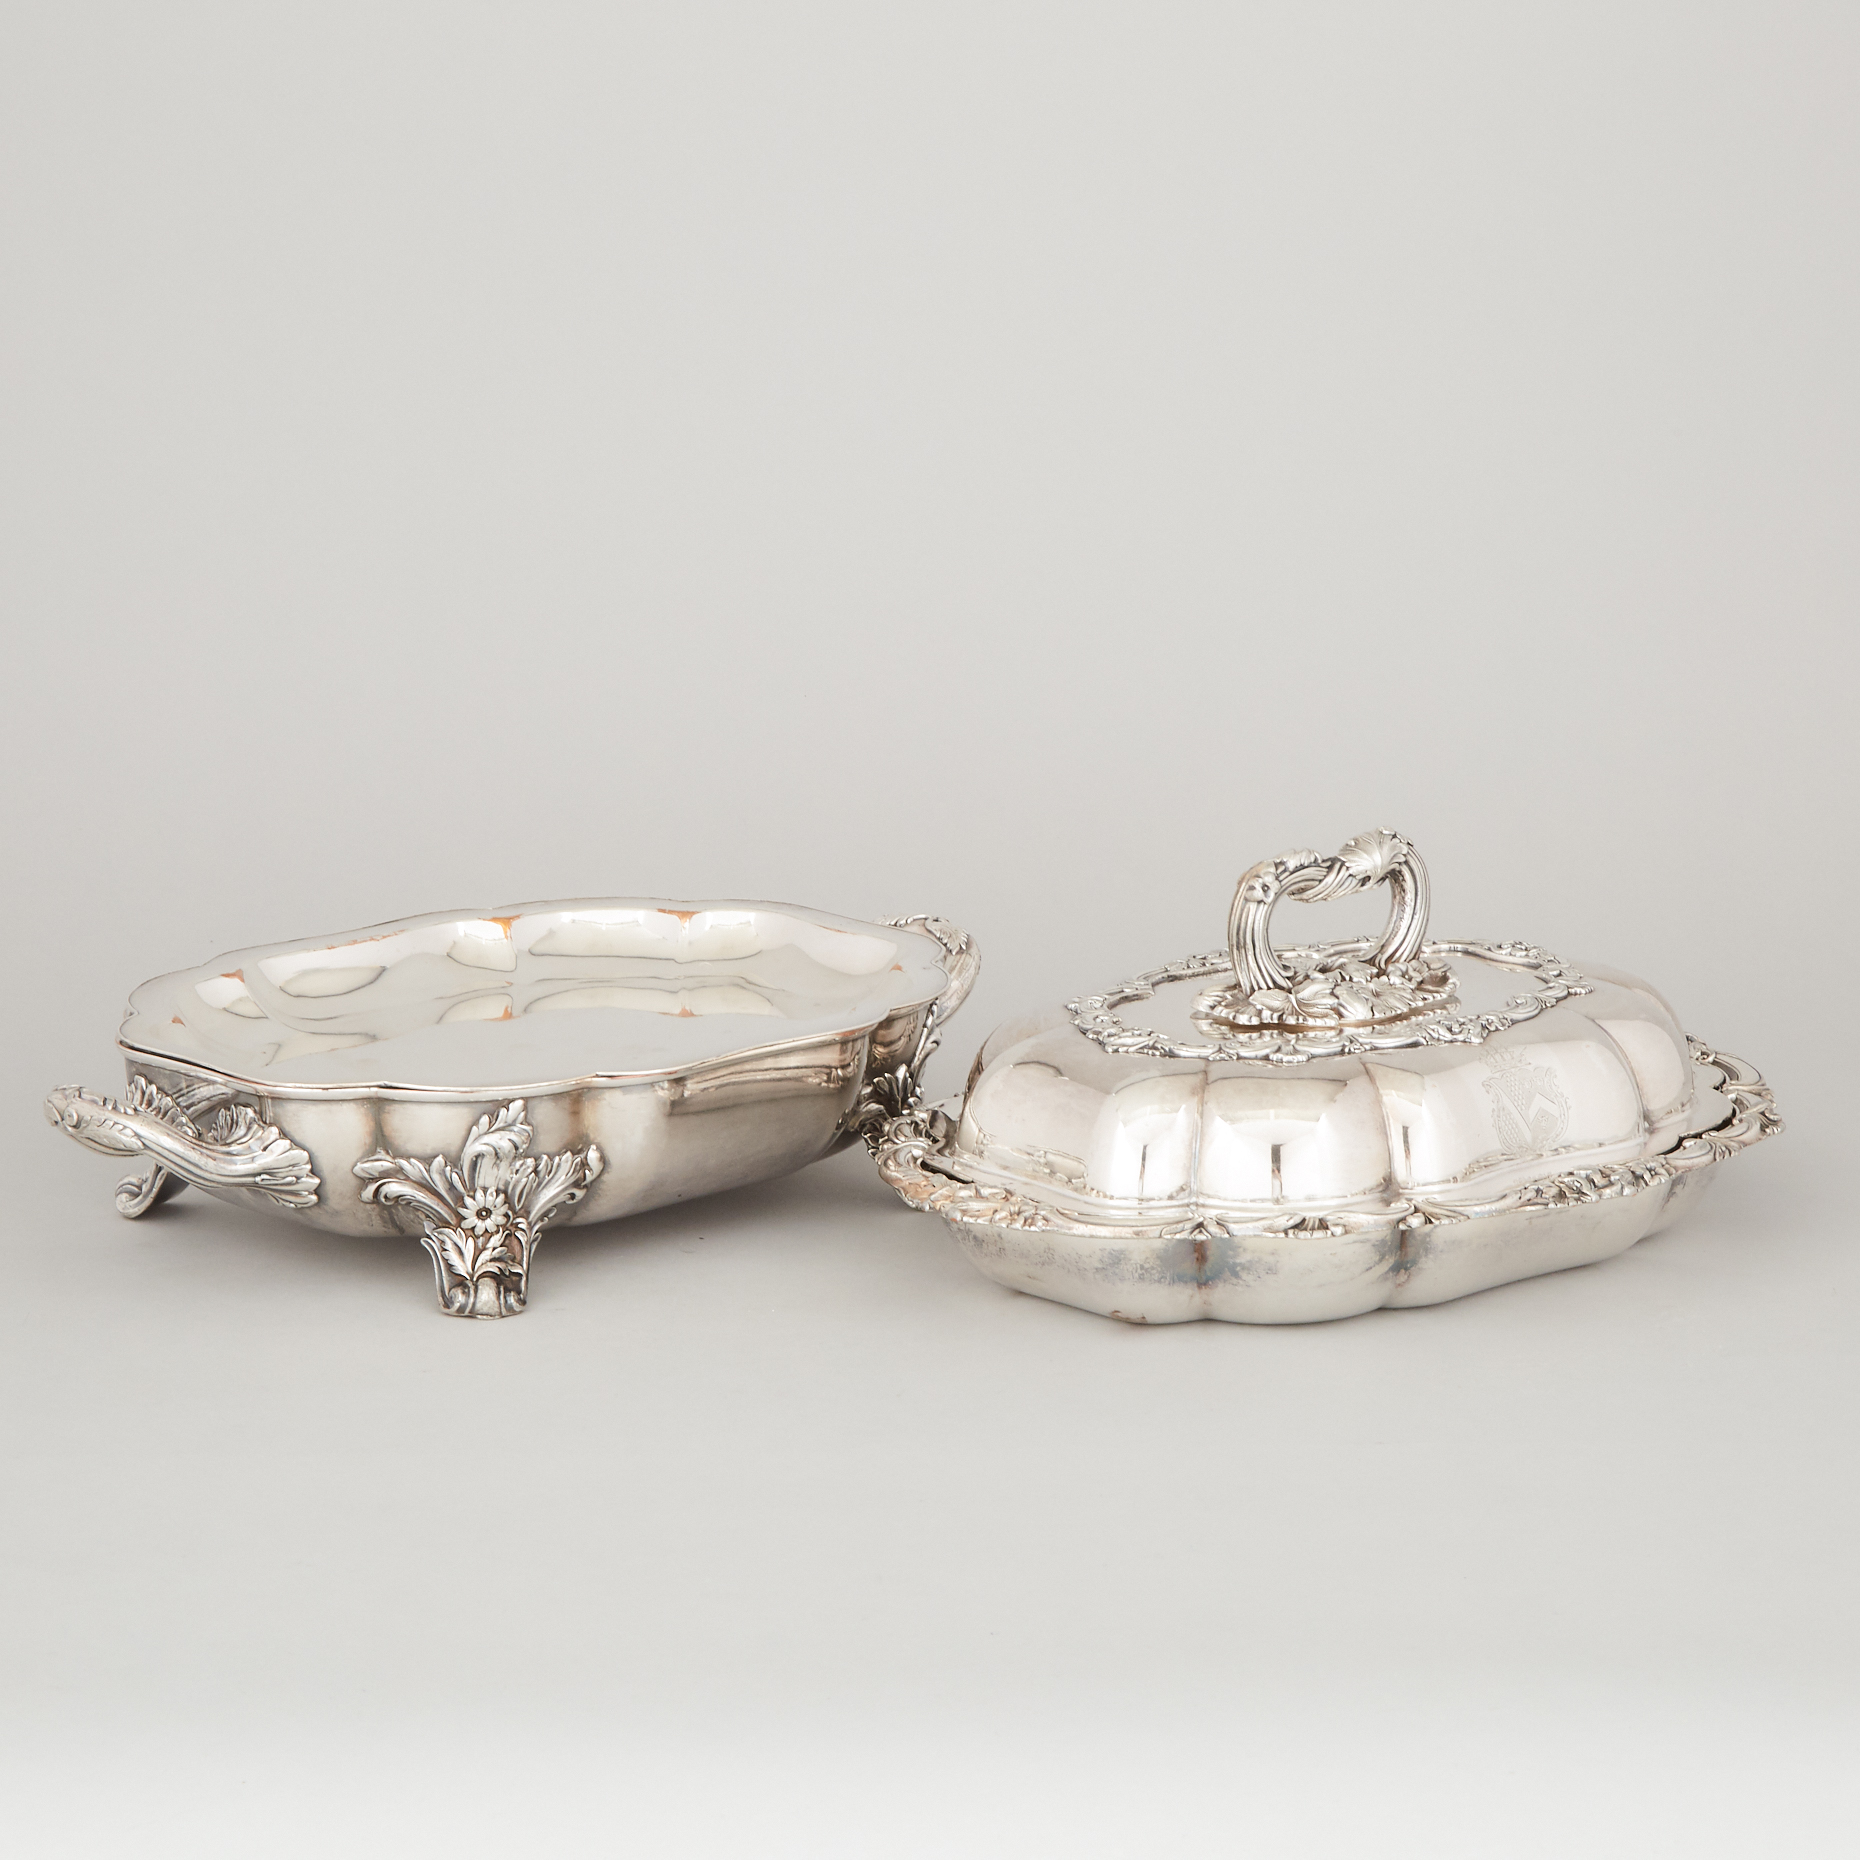 Old Sheffield Plate Oval Entrée Dish with Warming Stand, Roberts, Smith & Co., c.1830